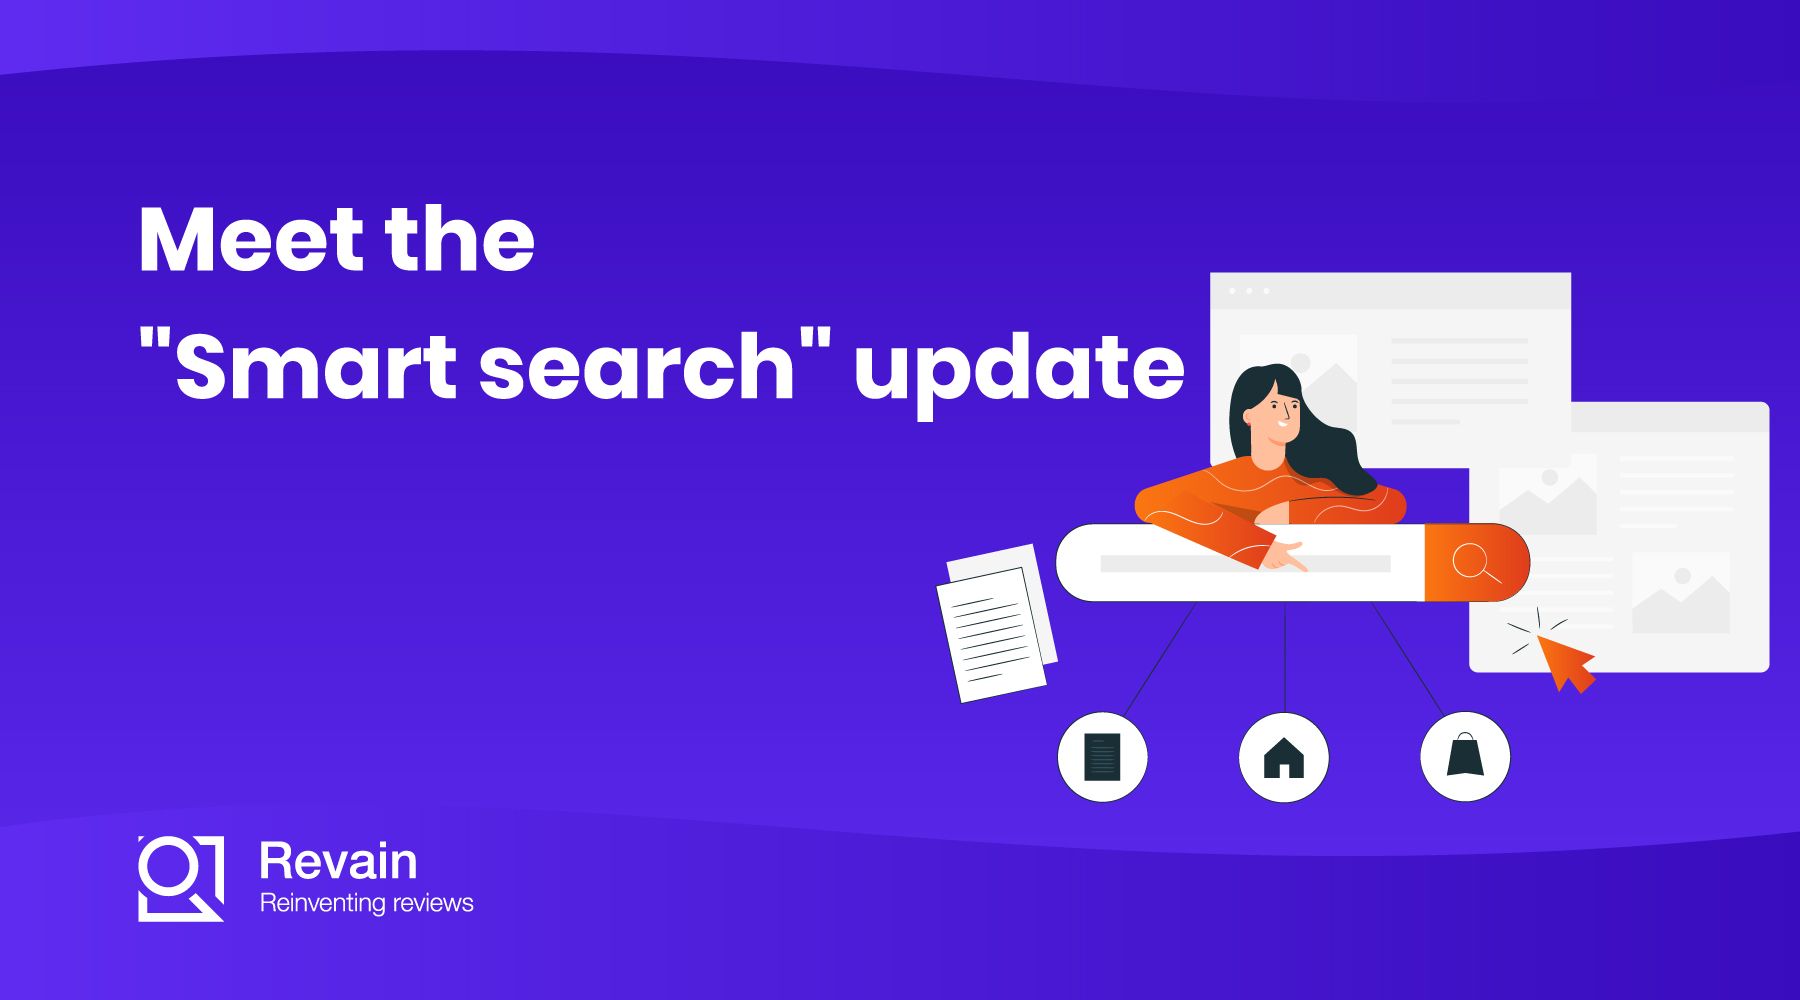 We've made "Smart search" even more convenient!